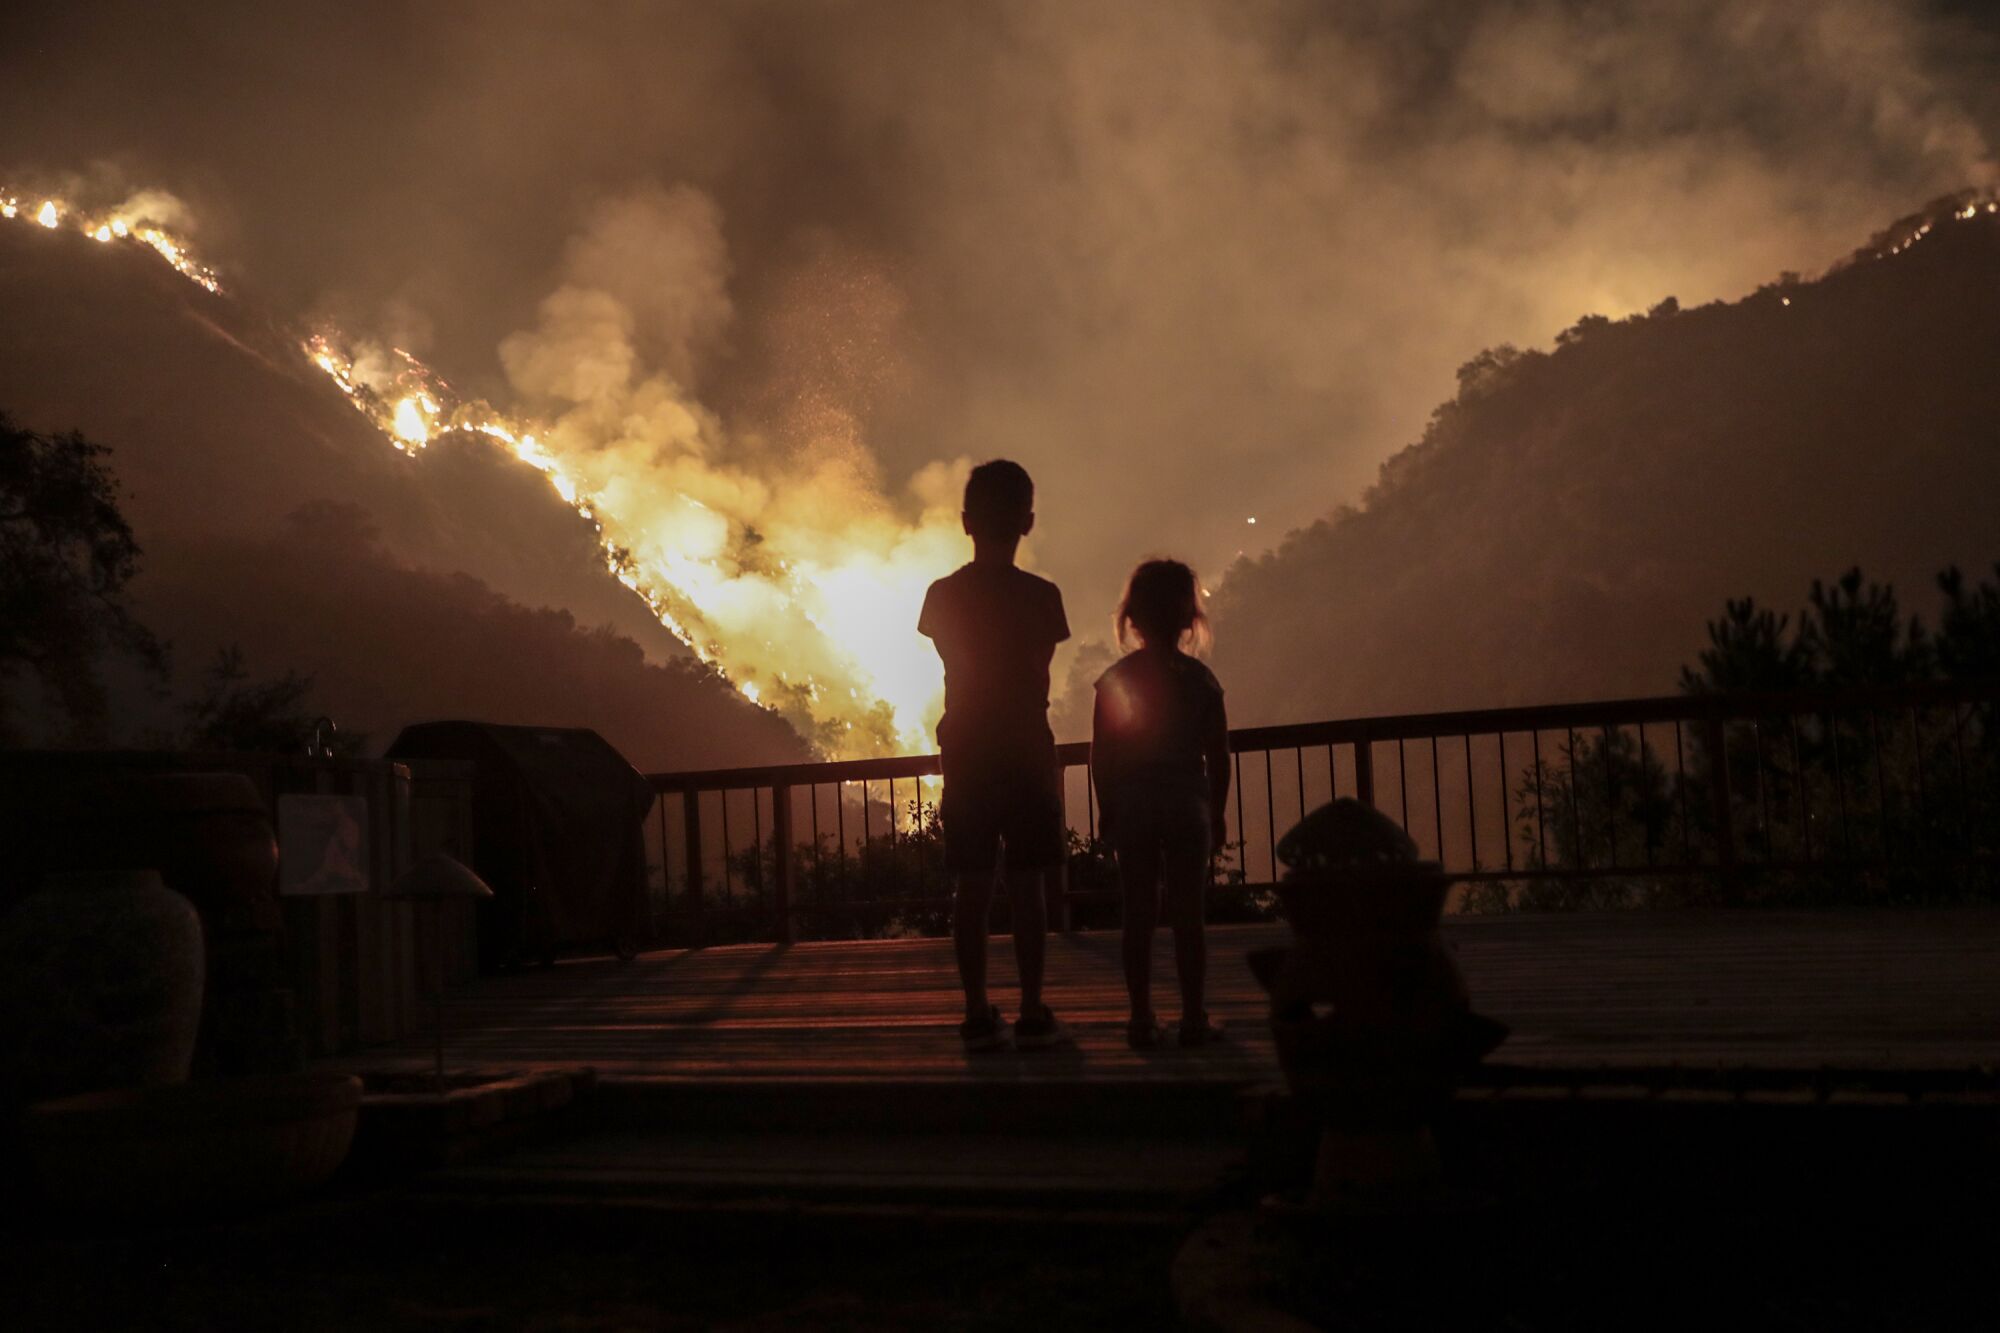 Iris, 4, and Castle Snider, 8, look on as flames from a controlled burn engulf the hillsides behind their backyard.